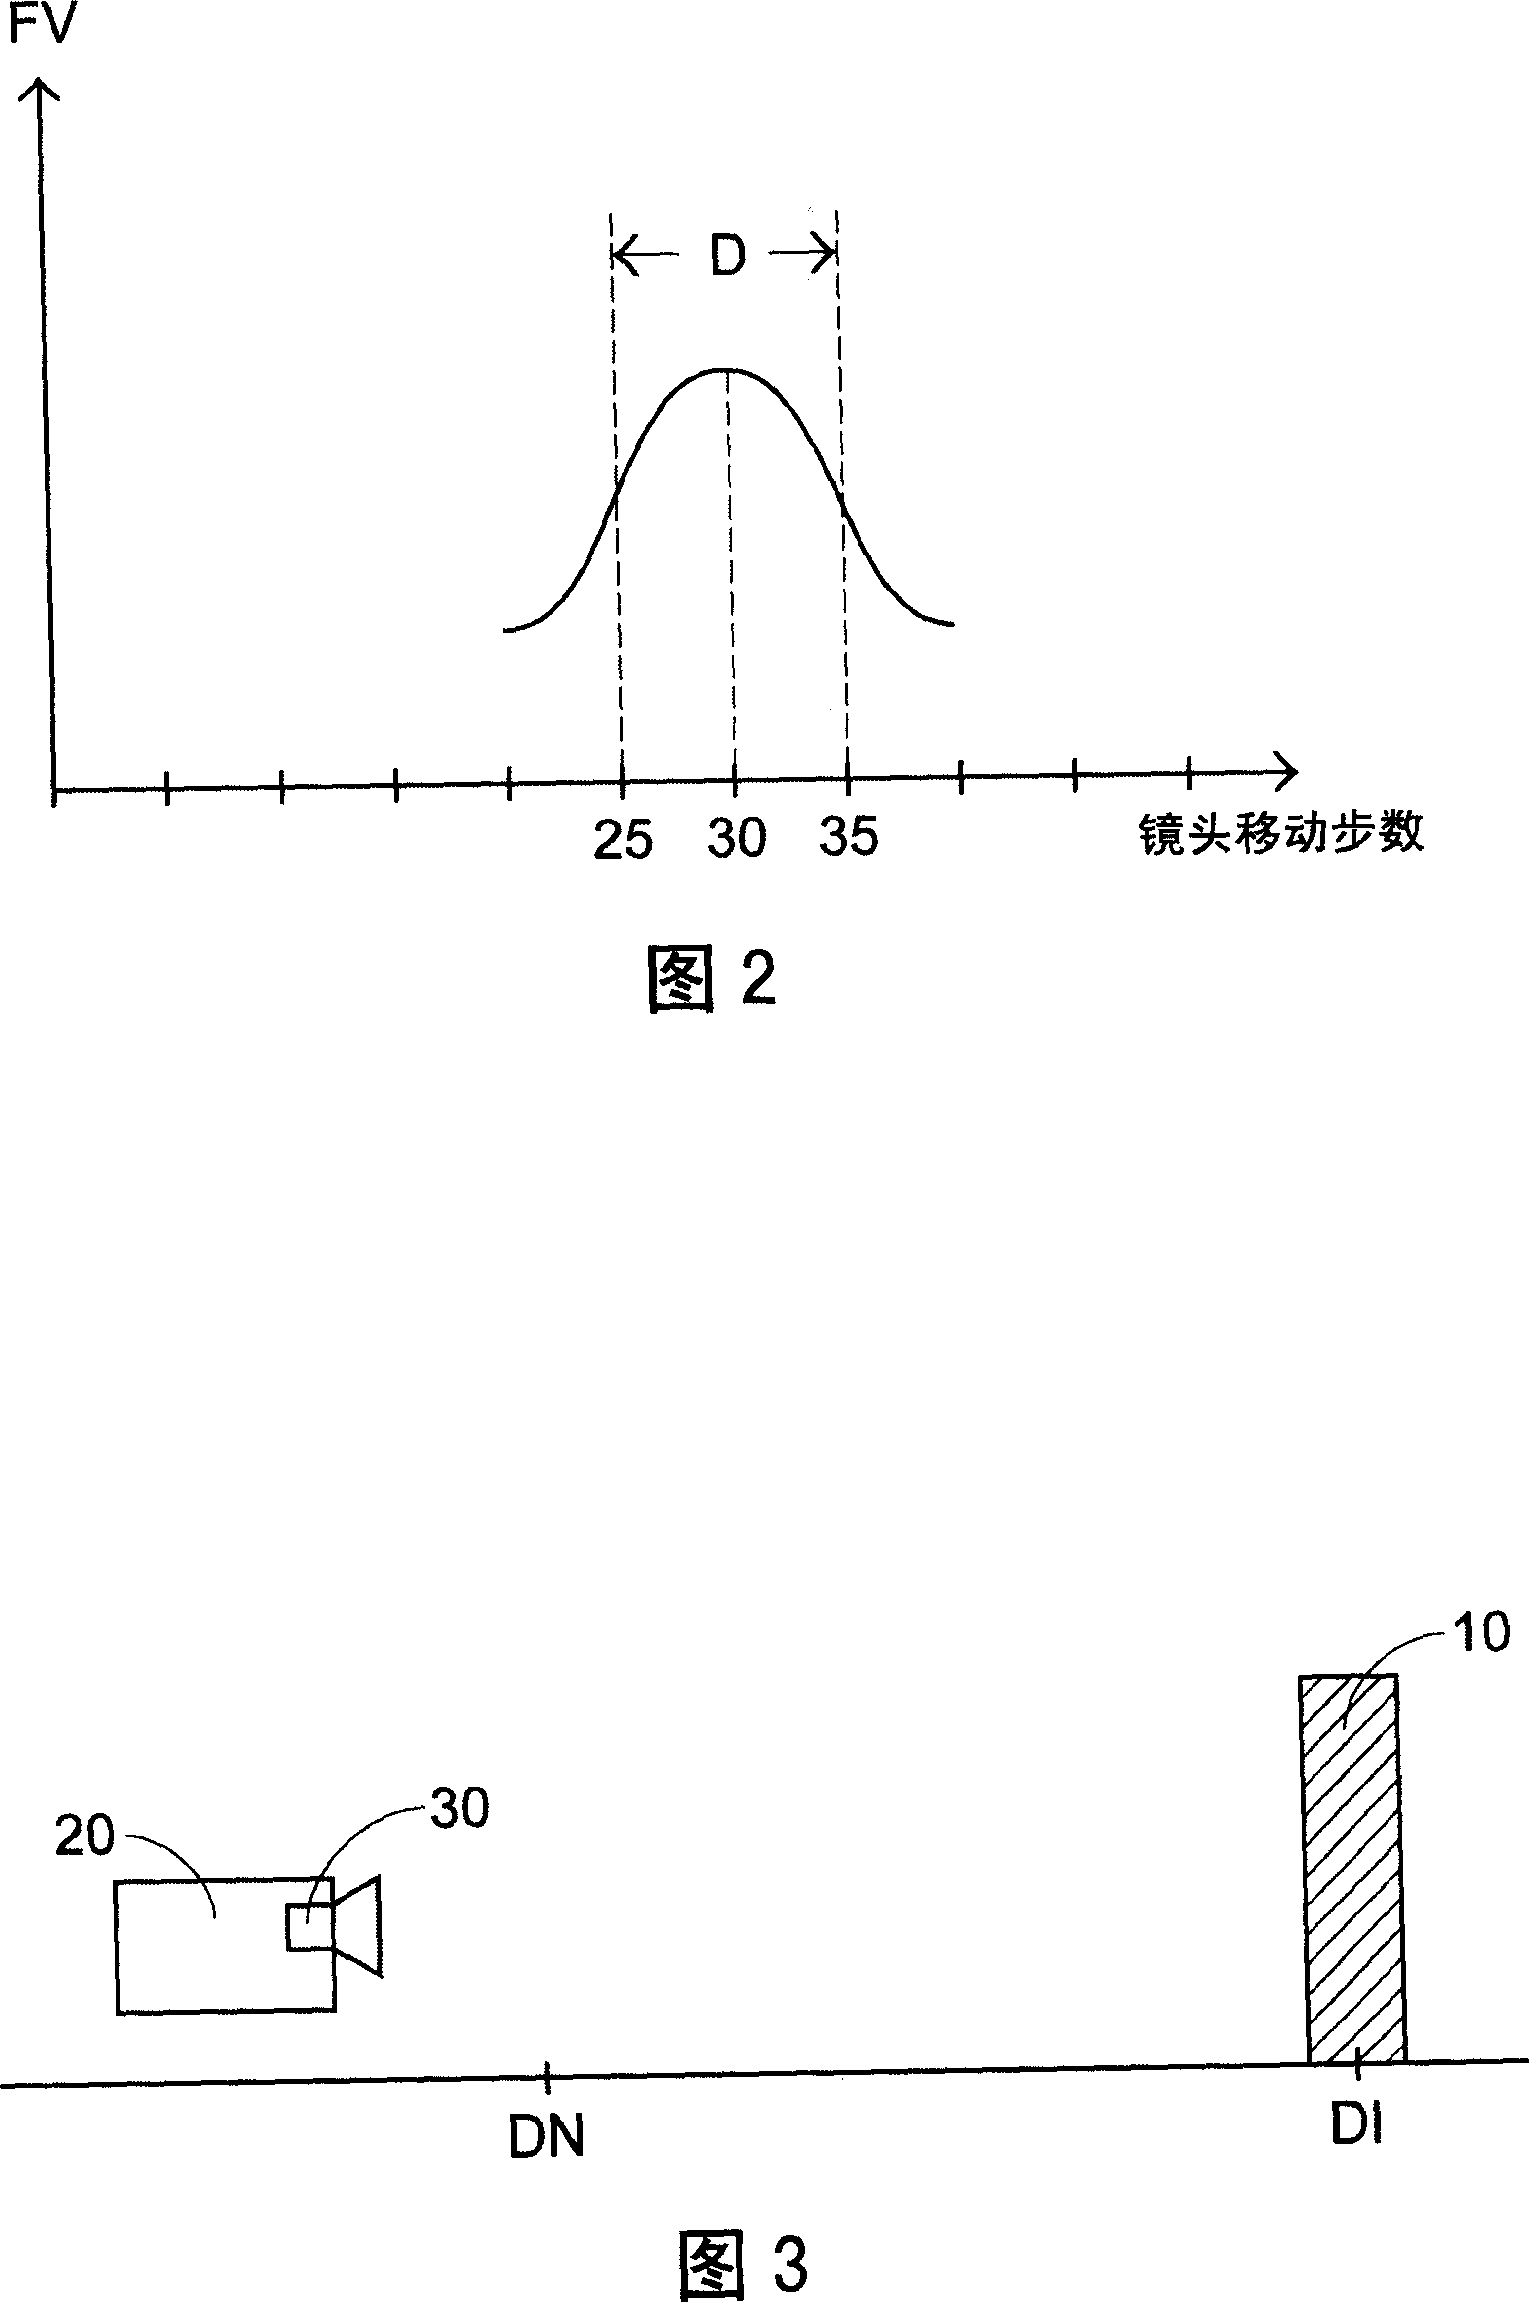 Method for estimating automatic focusing least effective sampling points